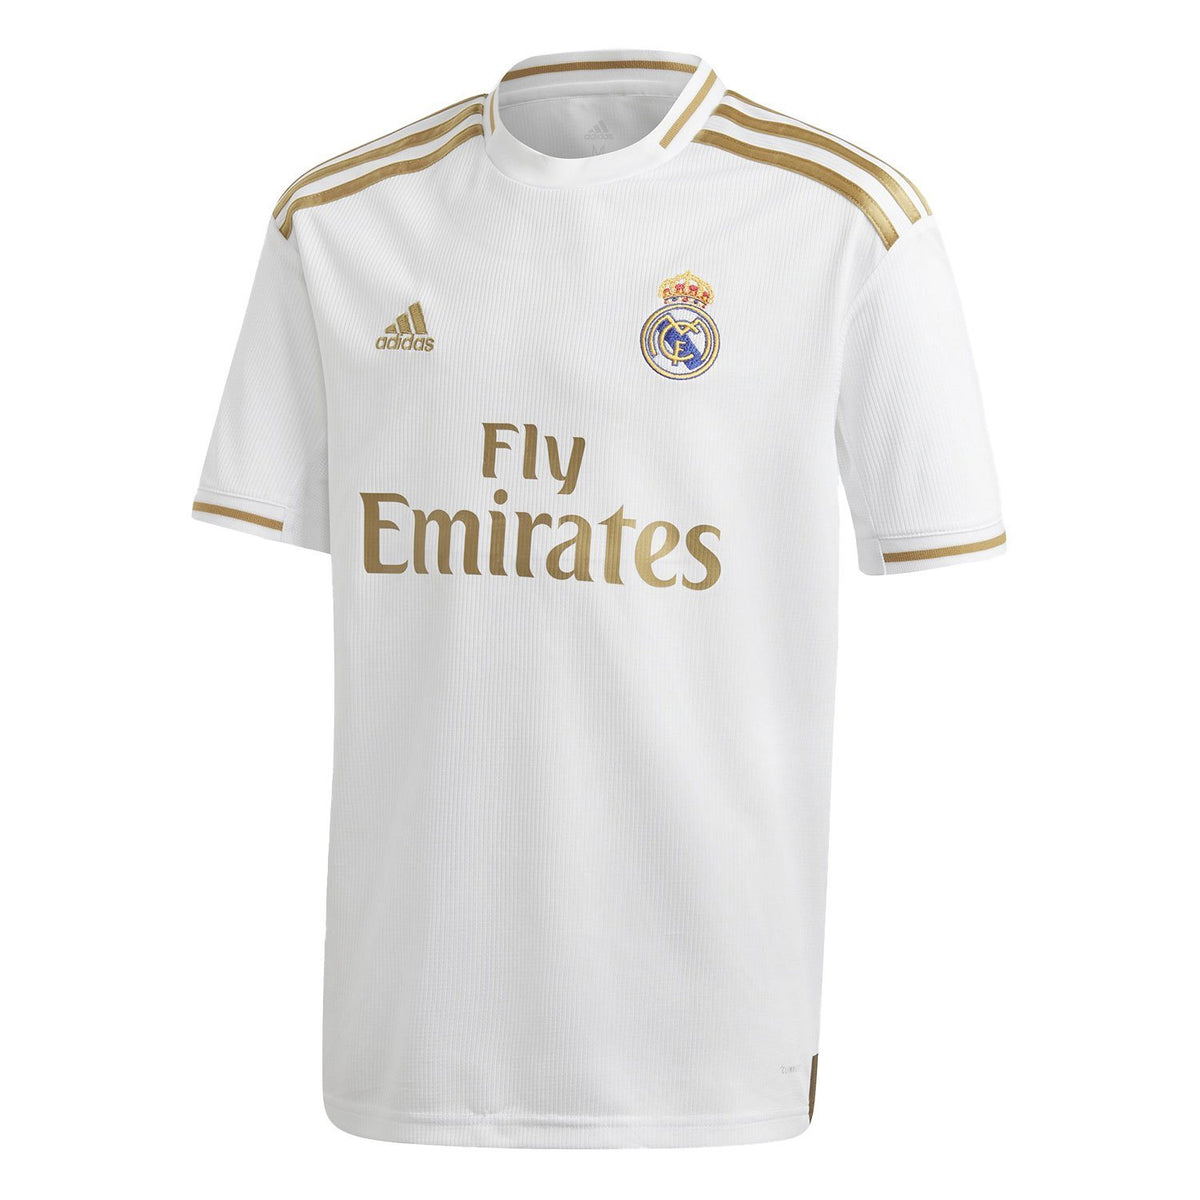 Real Madrid Youth Home Shirt 19/20 